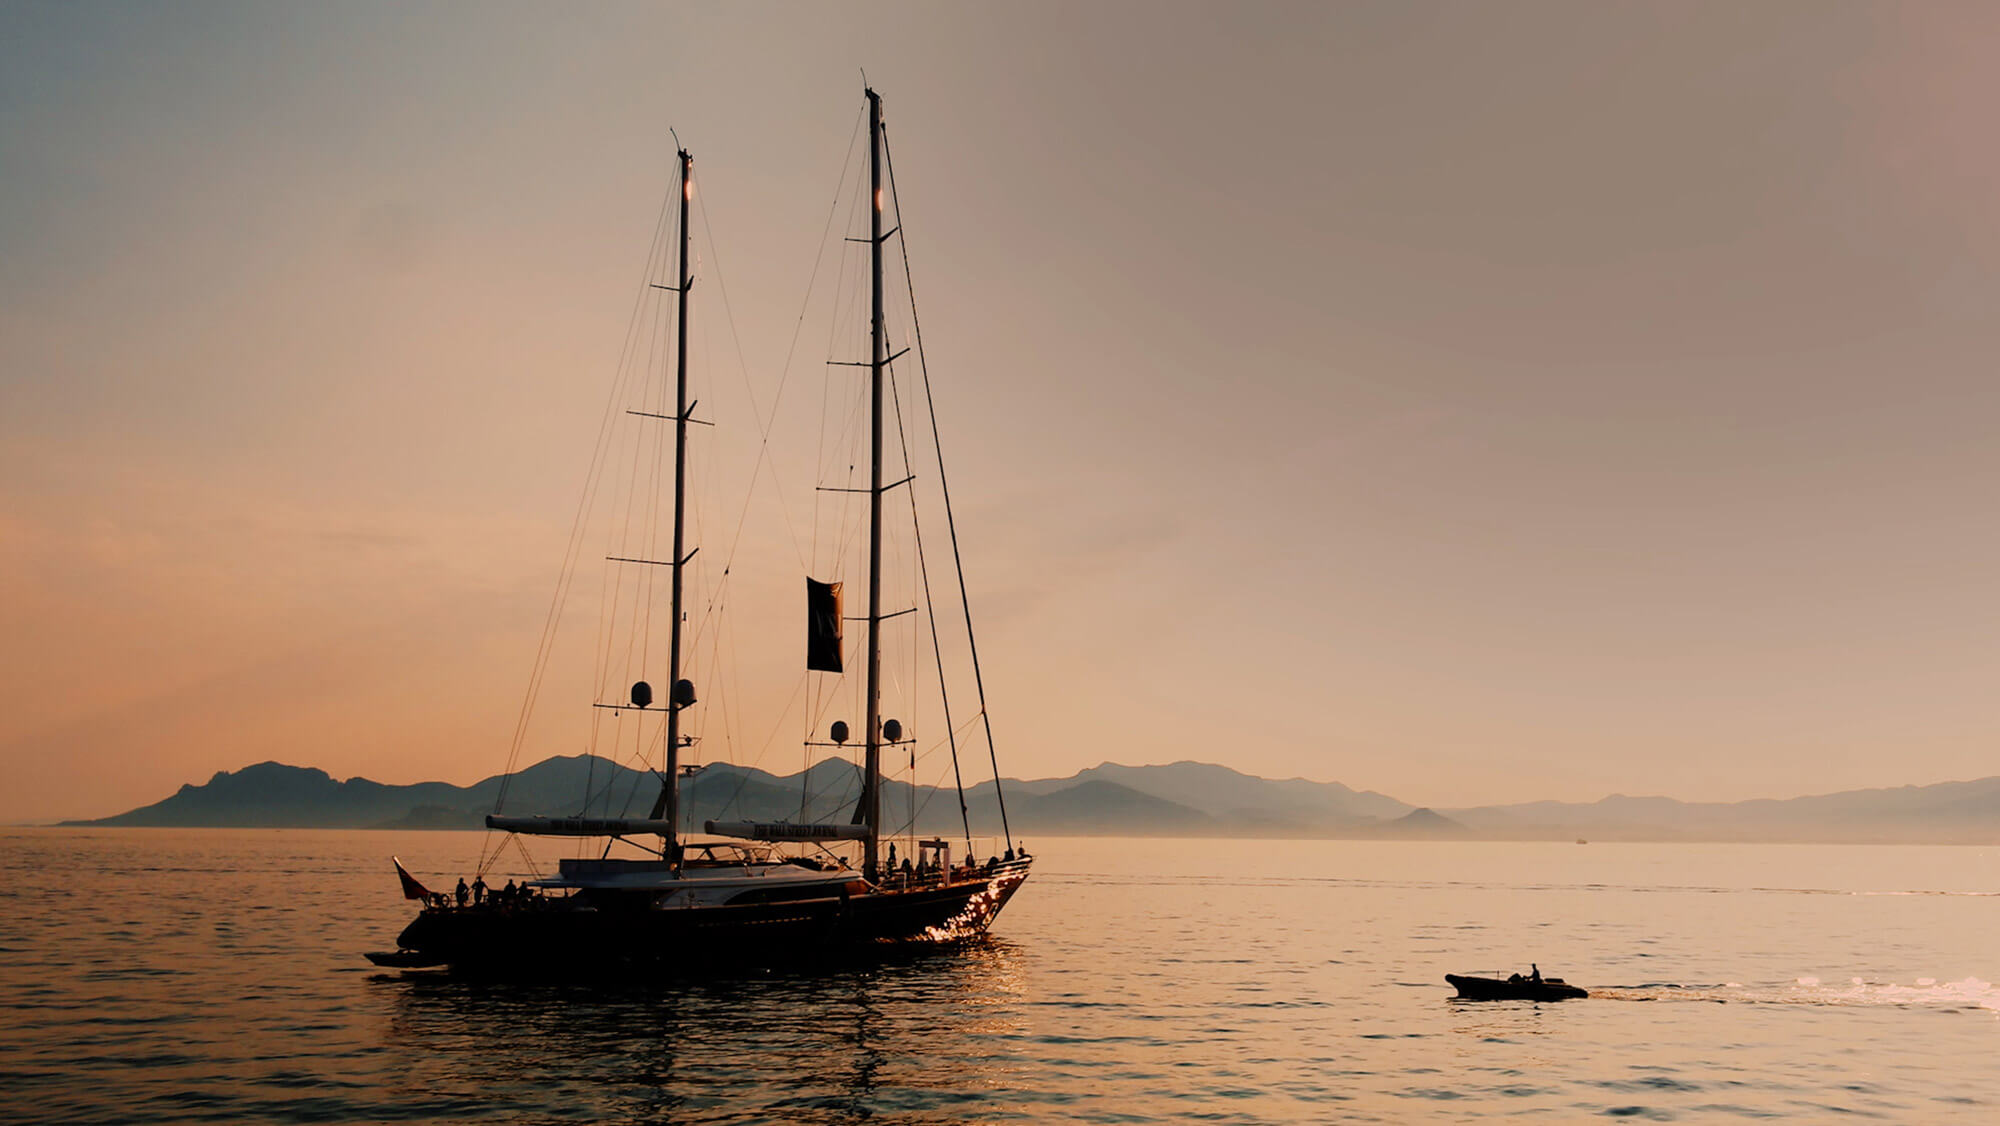 Still of a yacht at sunset from a cannes event video for Wall Street Journal, from the Rise Media case studies archive